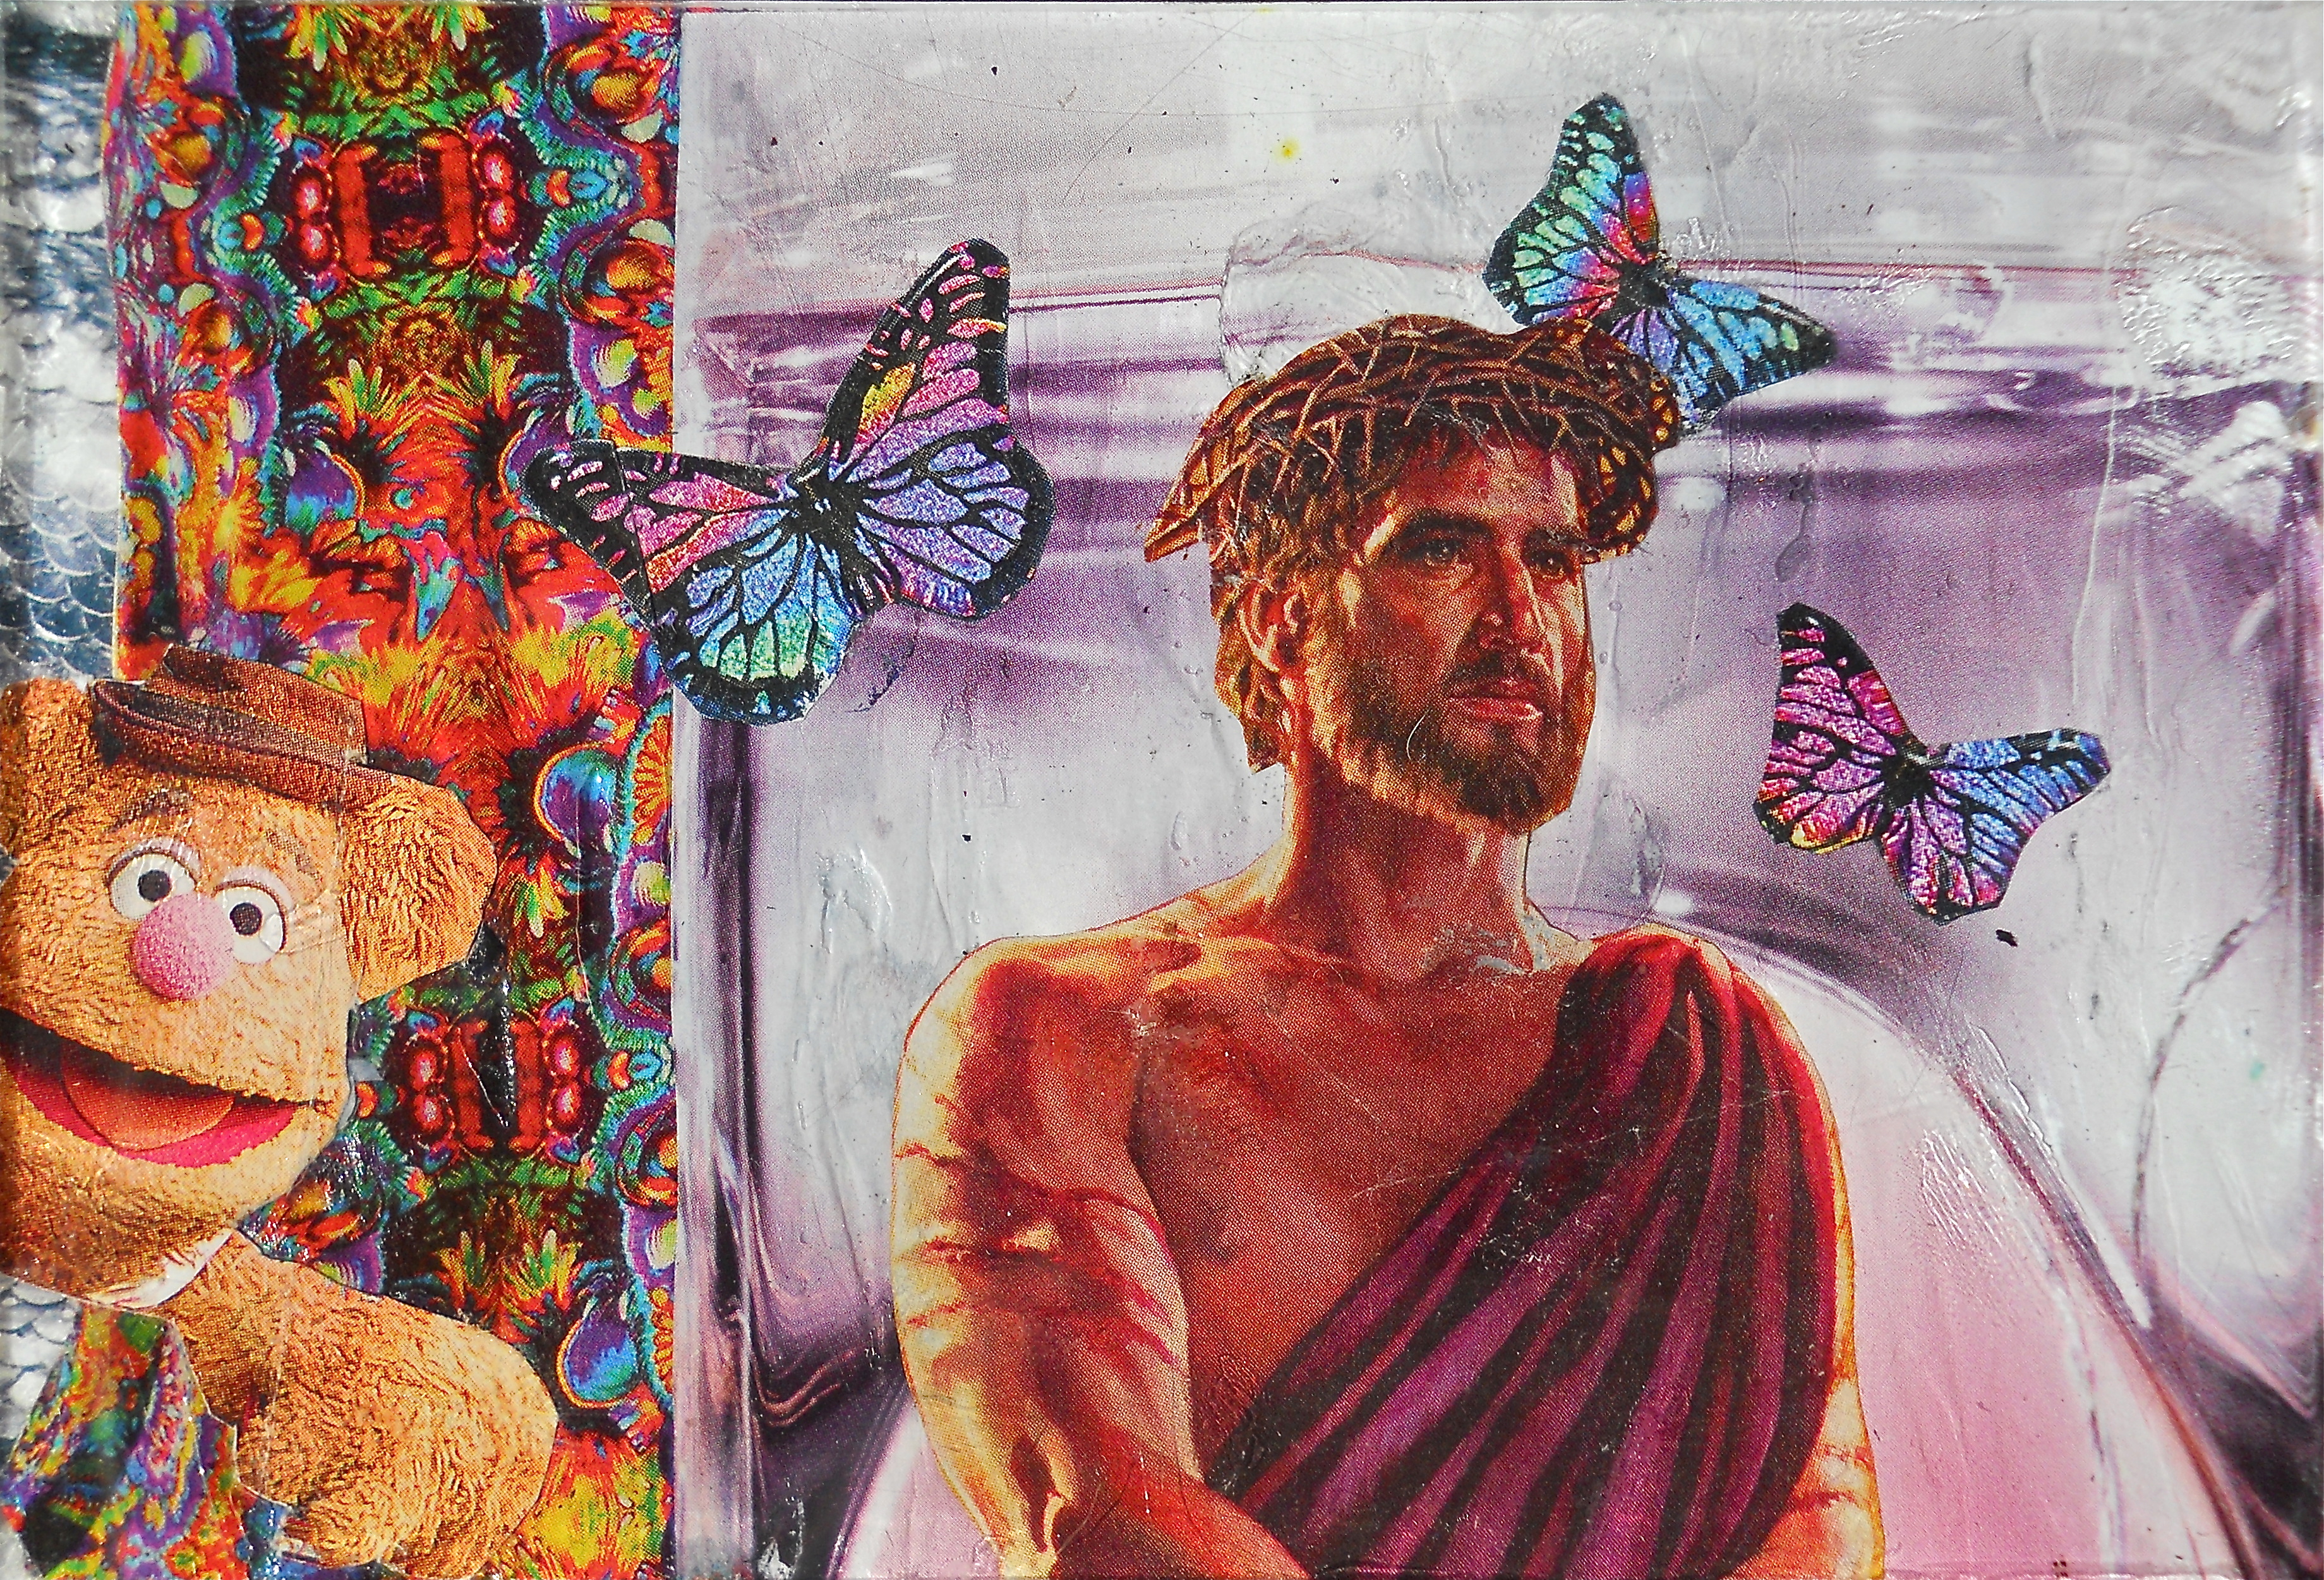 JESUS AND THE BUTTERFLIES  2012, 3 x 5 inches, collage on plexiglas